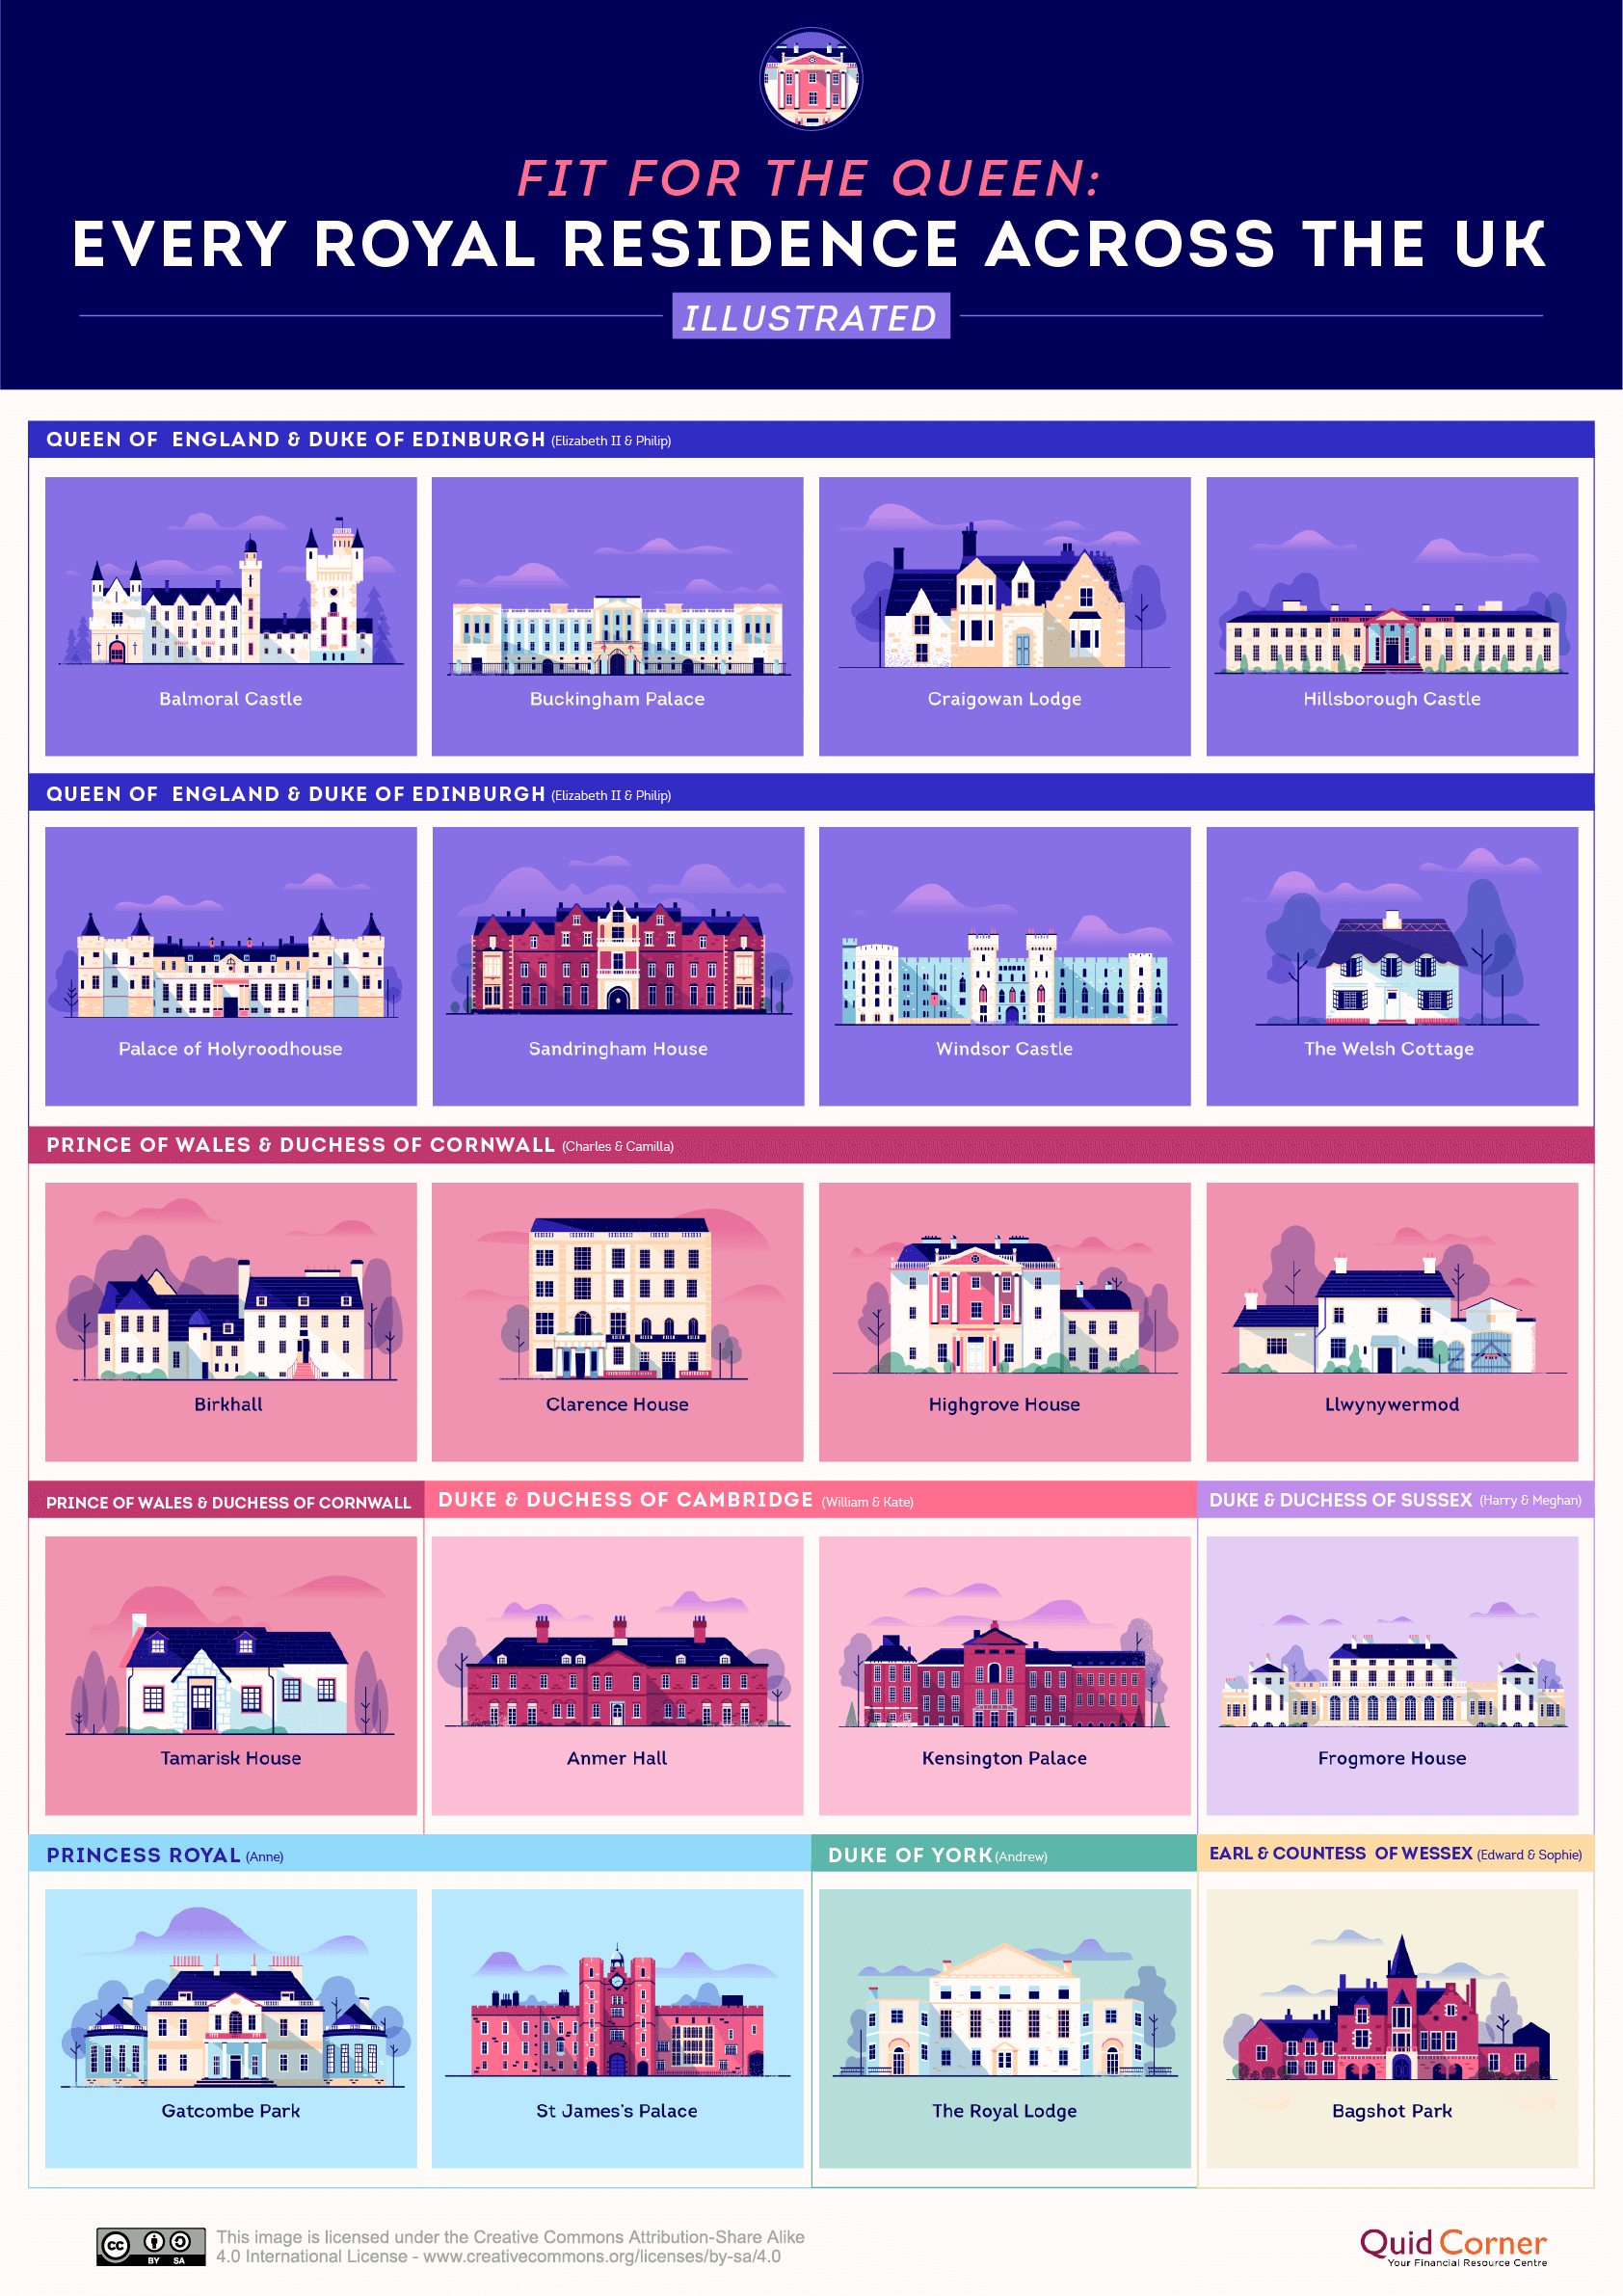 Every Royal Residence Across the UK Illustrated